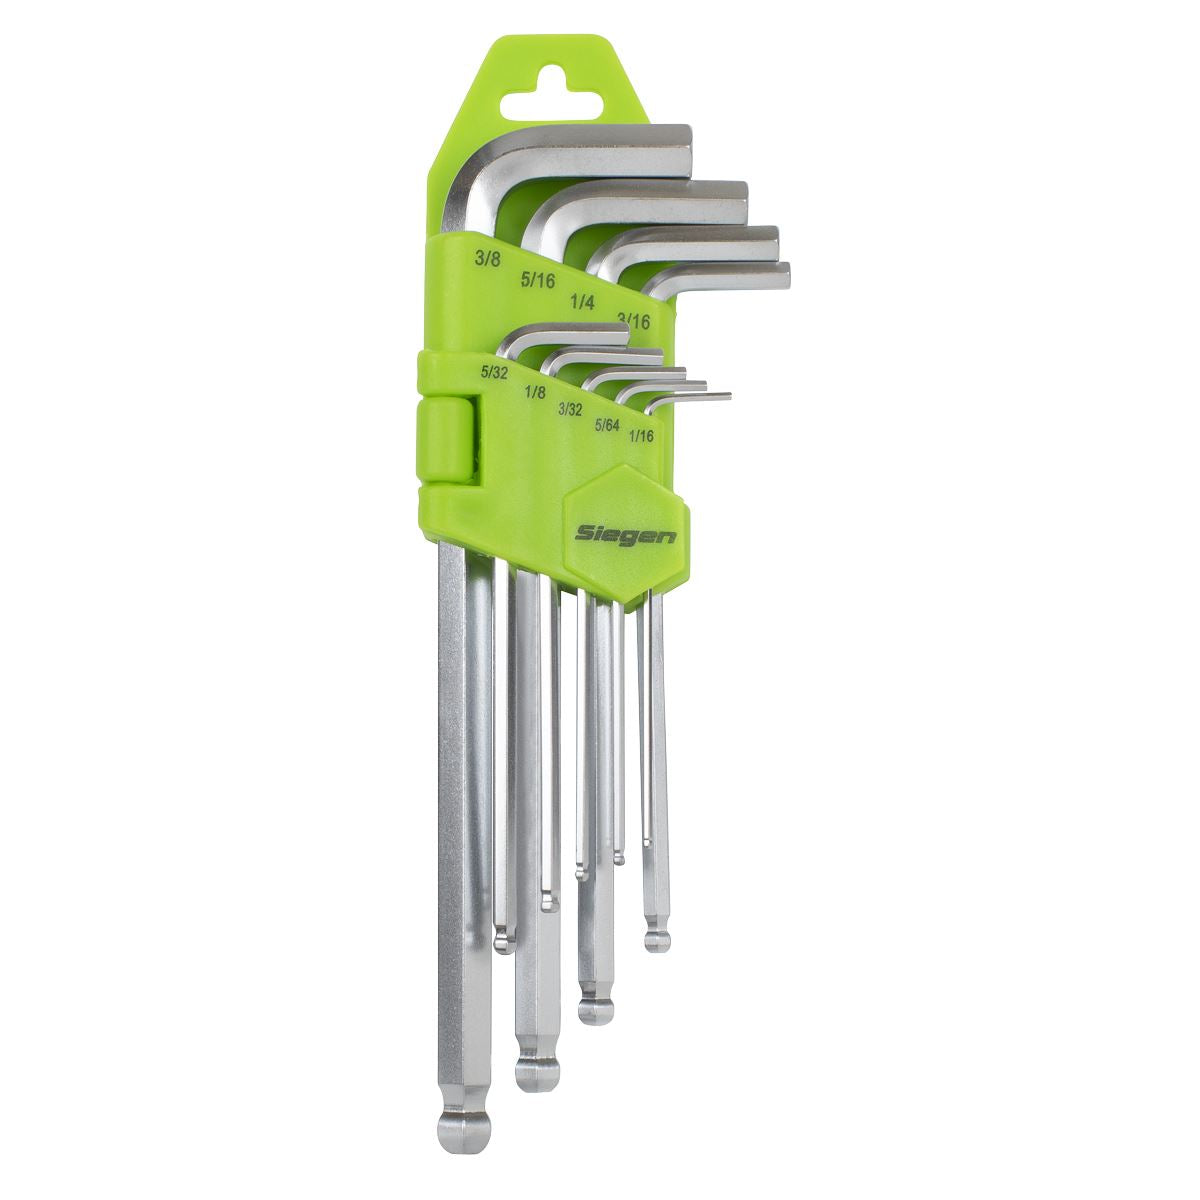 Sealey Hex Key Set Long Ball-End 9pc - Imperial S01261